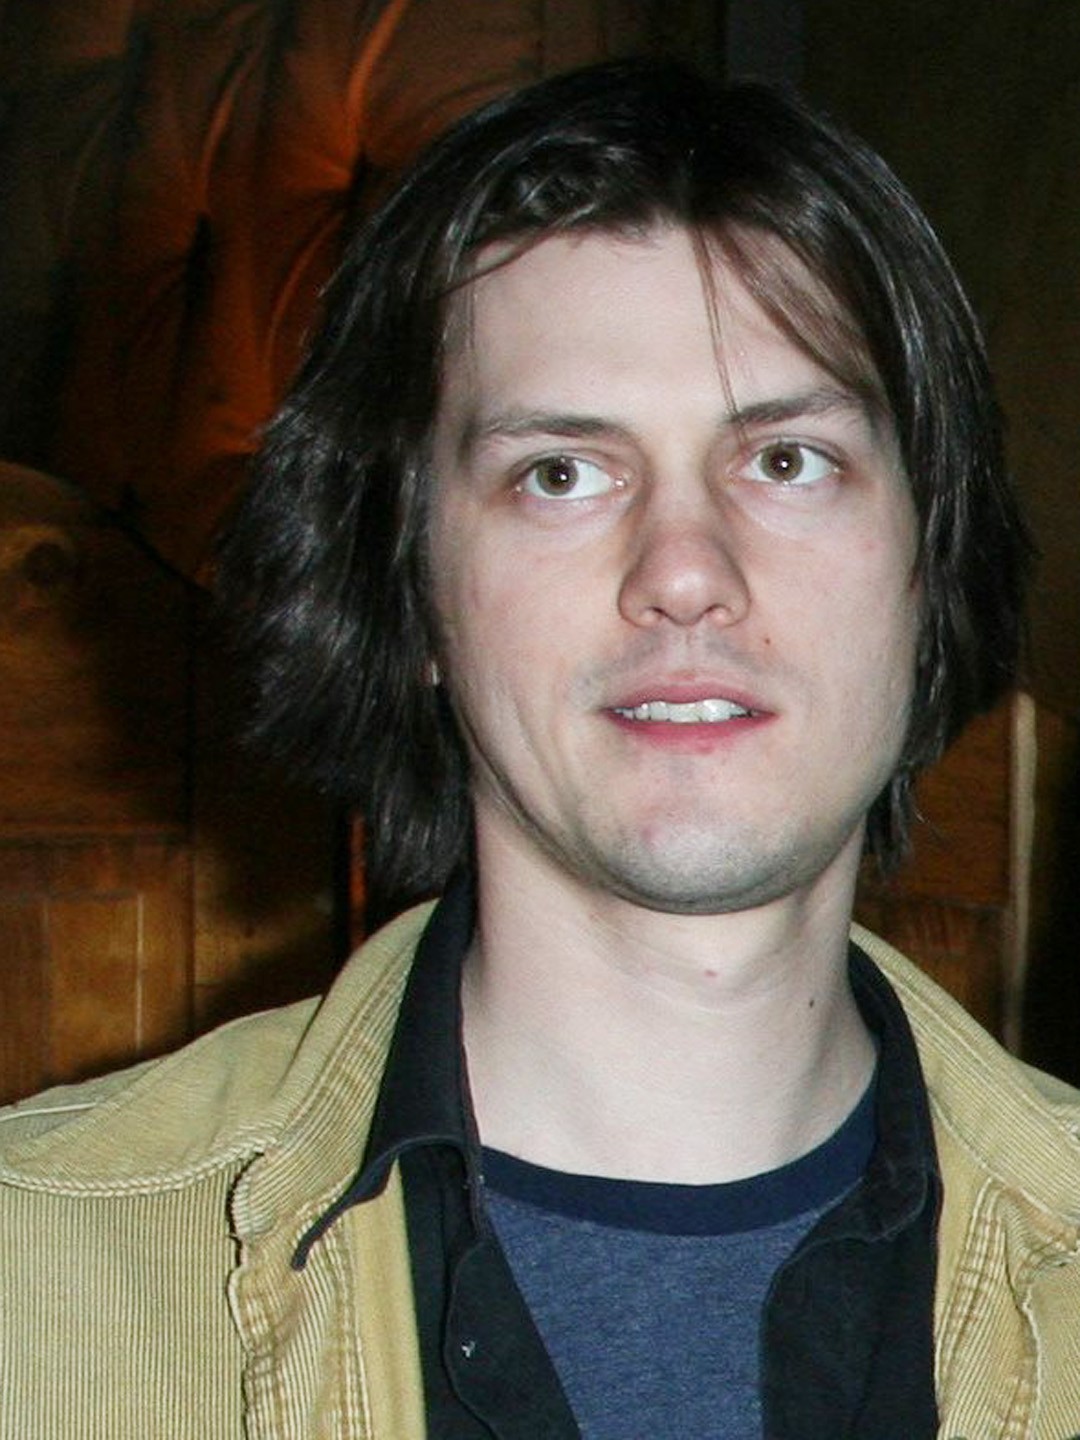 The Whitest Kids U Know' Star Trevor Moore Fell to His Death